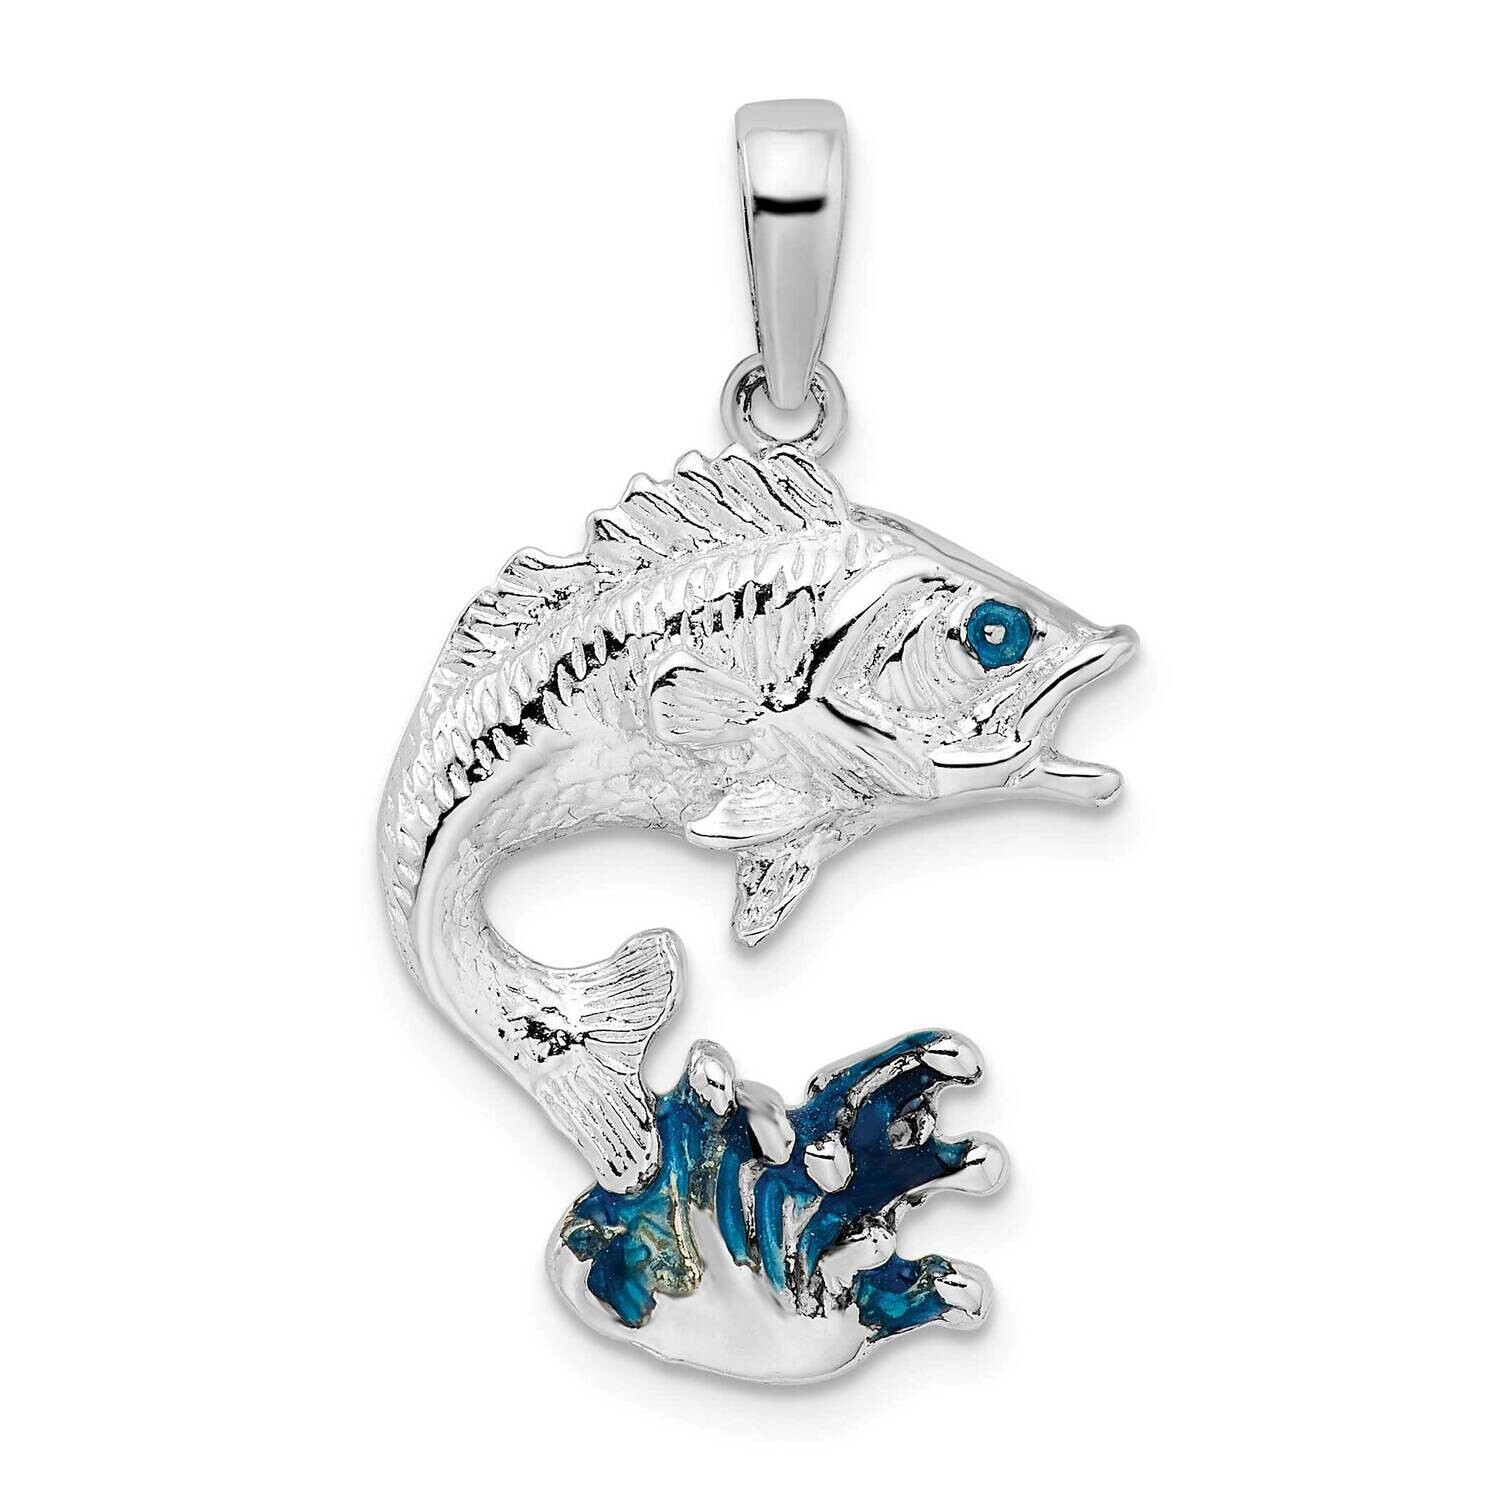 Enameled Jumping Bass Fish Pendant Sterling Silver Polished QC10625